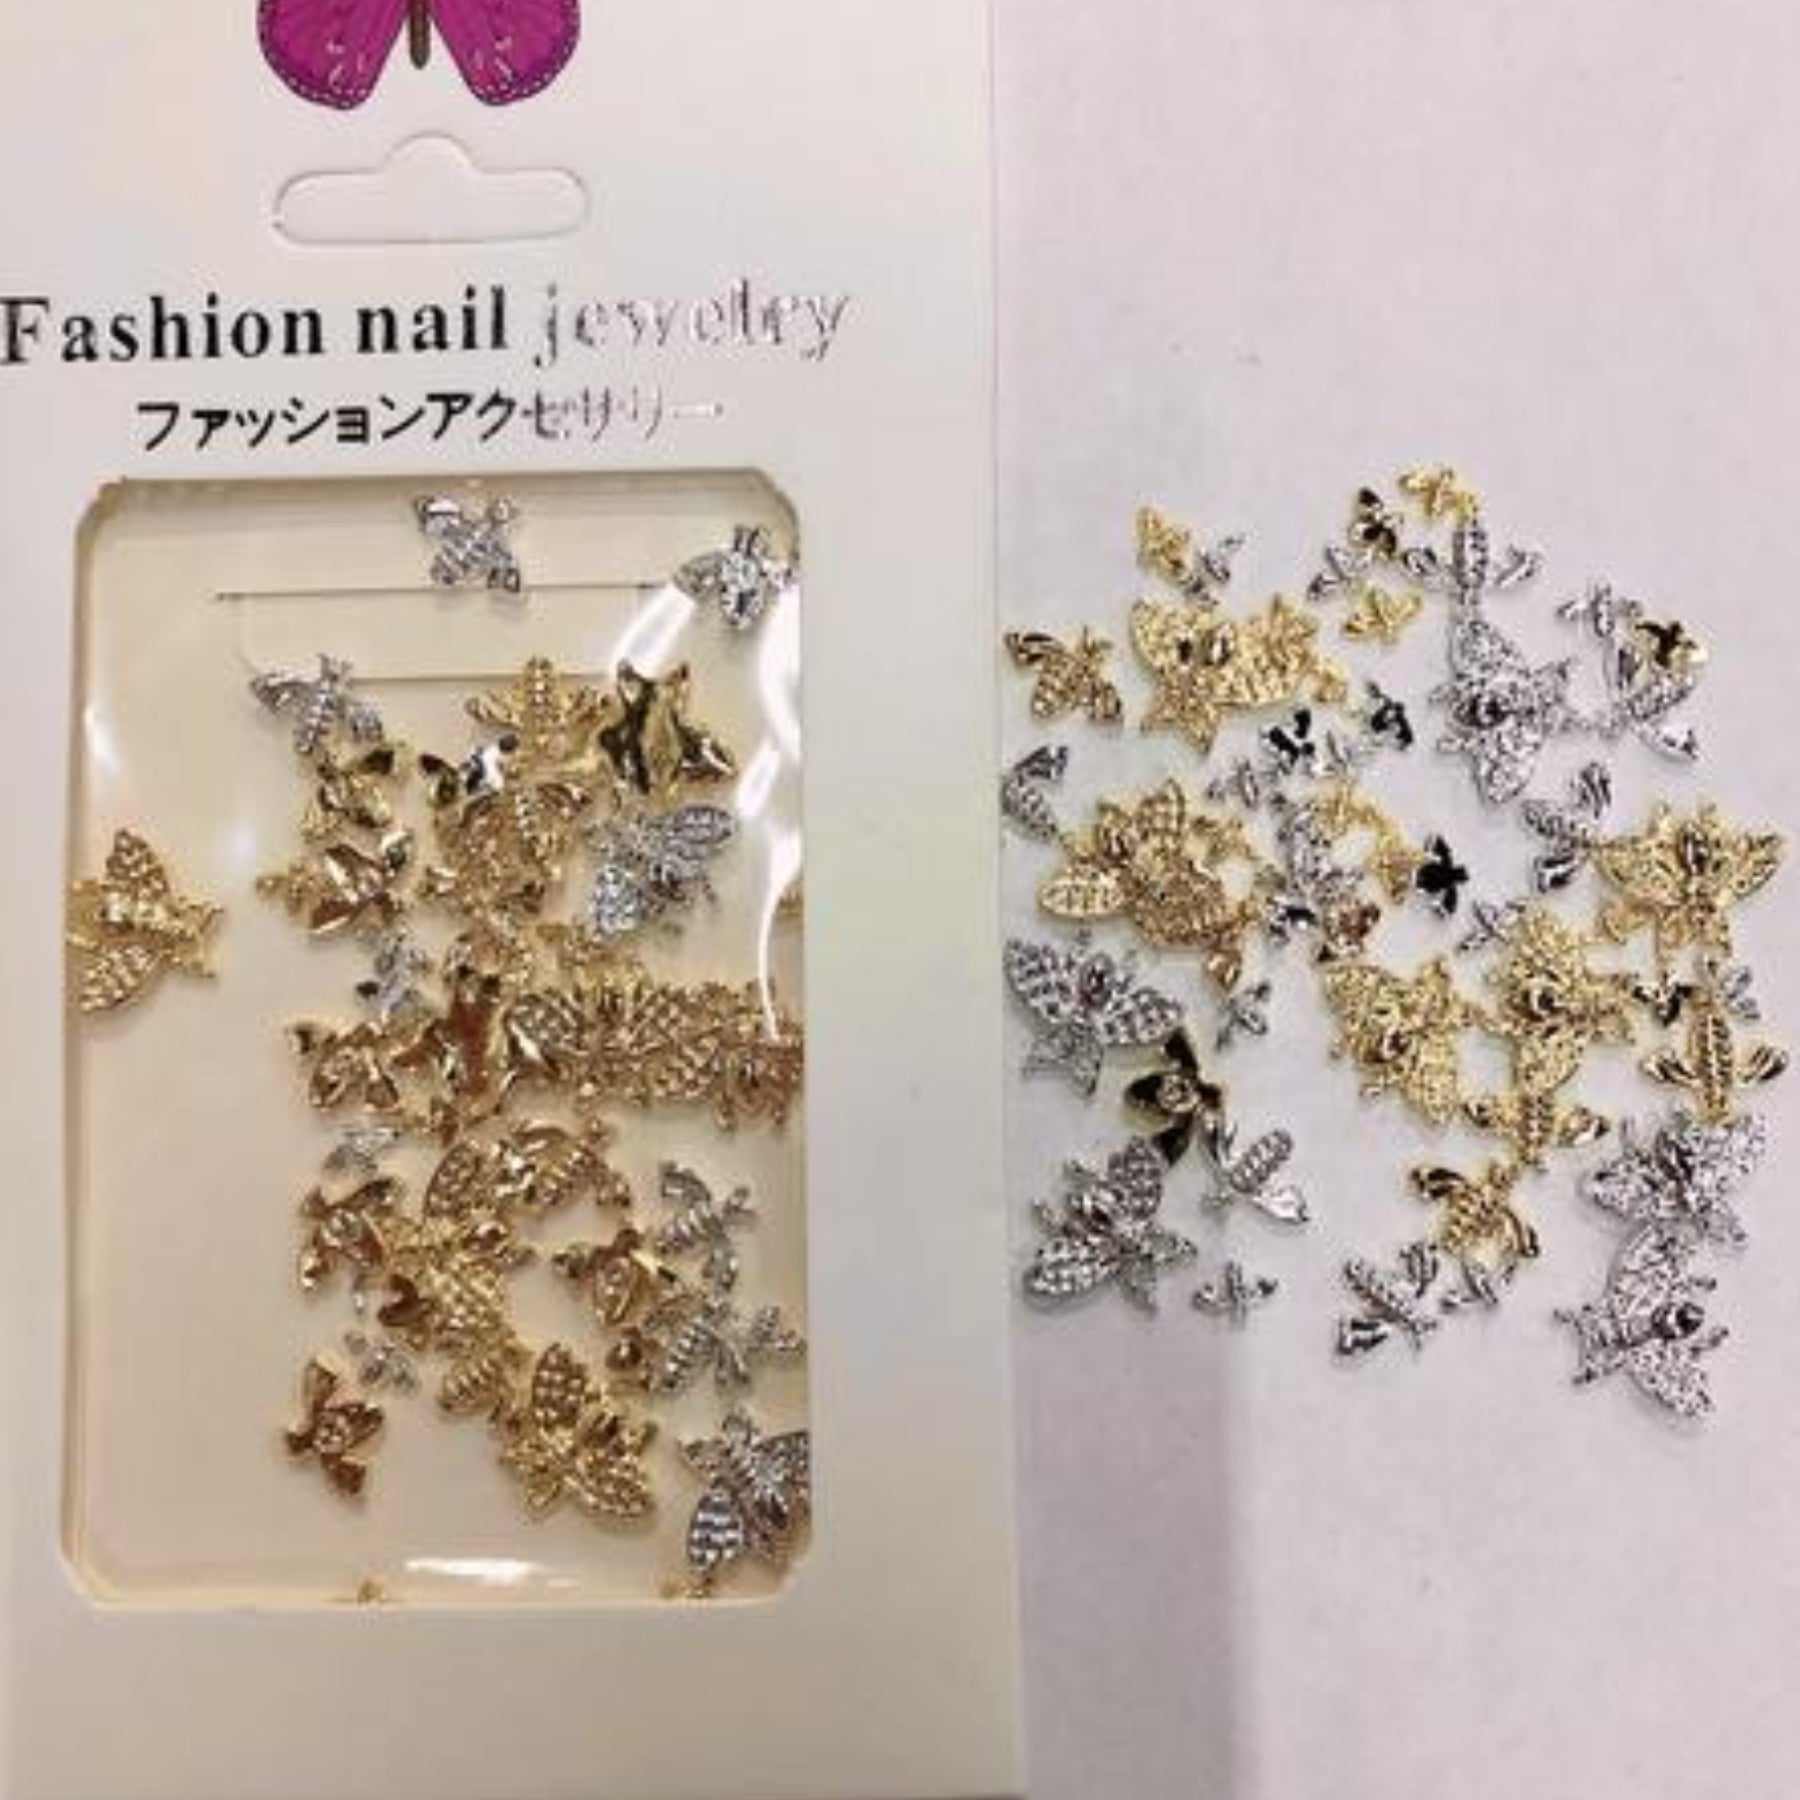 Shiny Silver and Gold Metal Charms for Nail Decorations